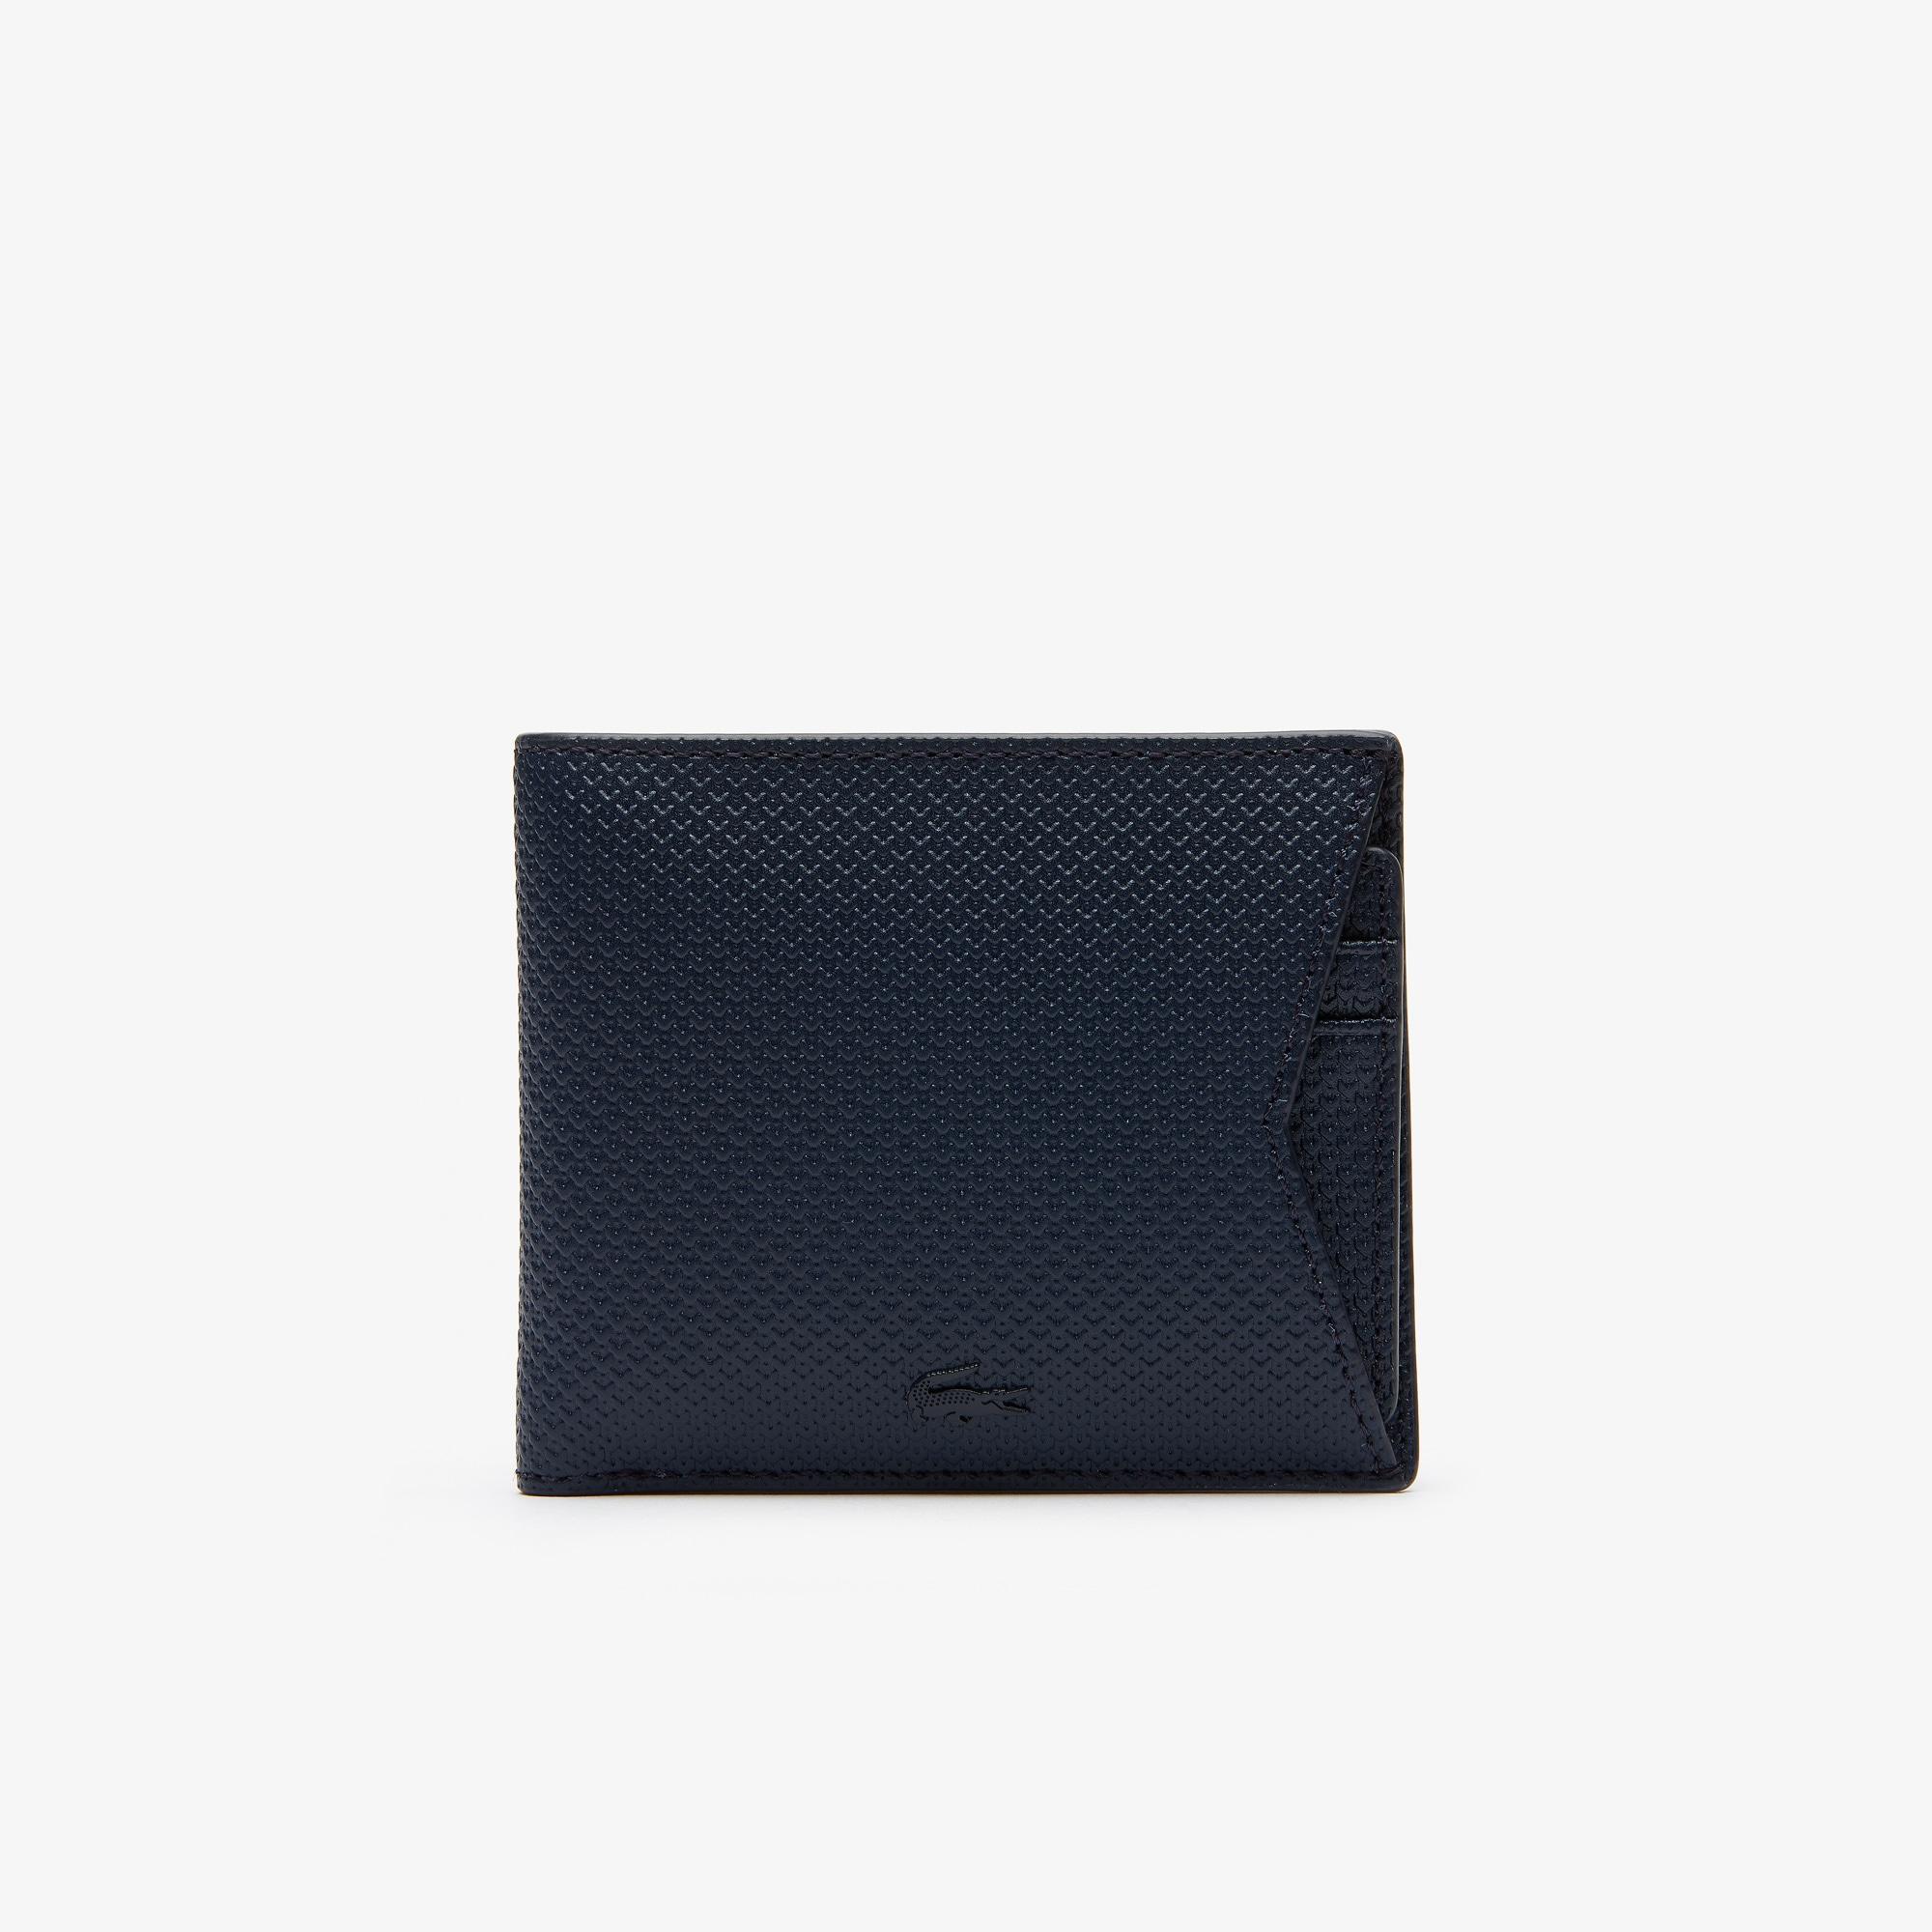 Lacoste Chantaco Leather 8 Card Holder And Wallet in Blue for Men - Save 52% - Lyst